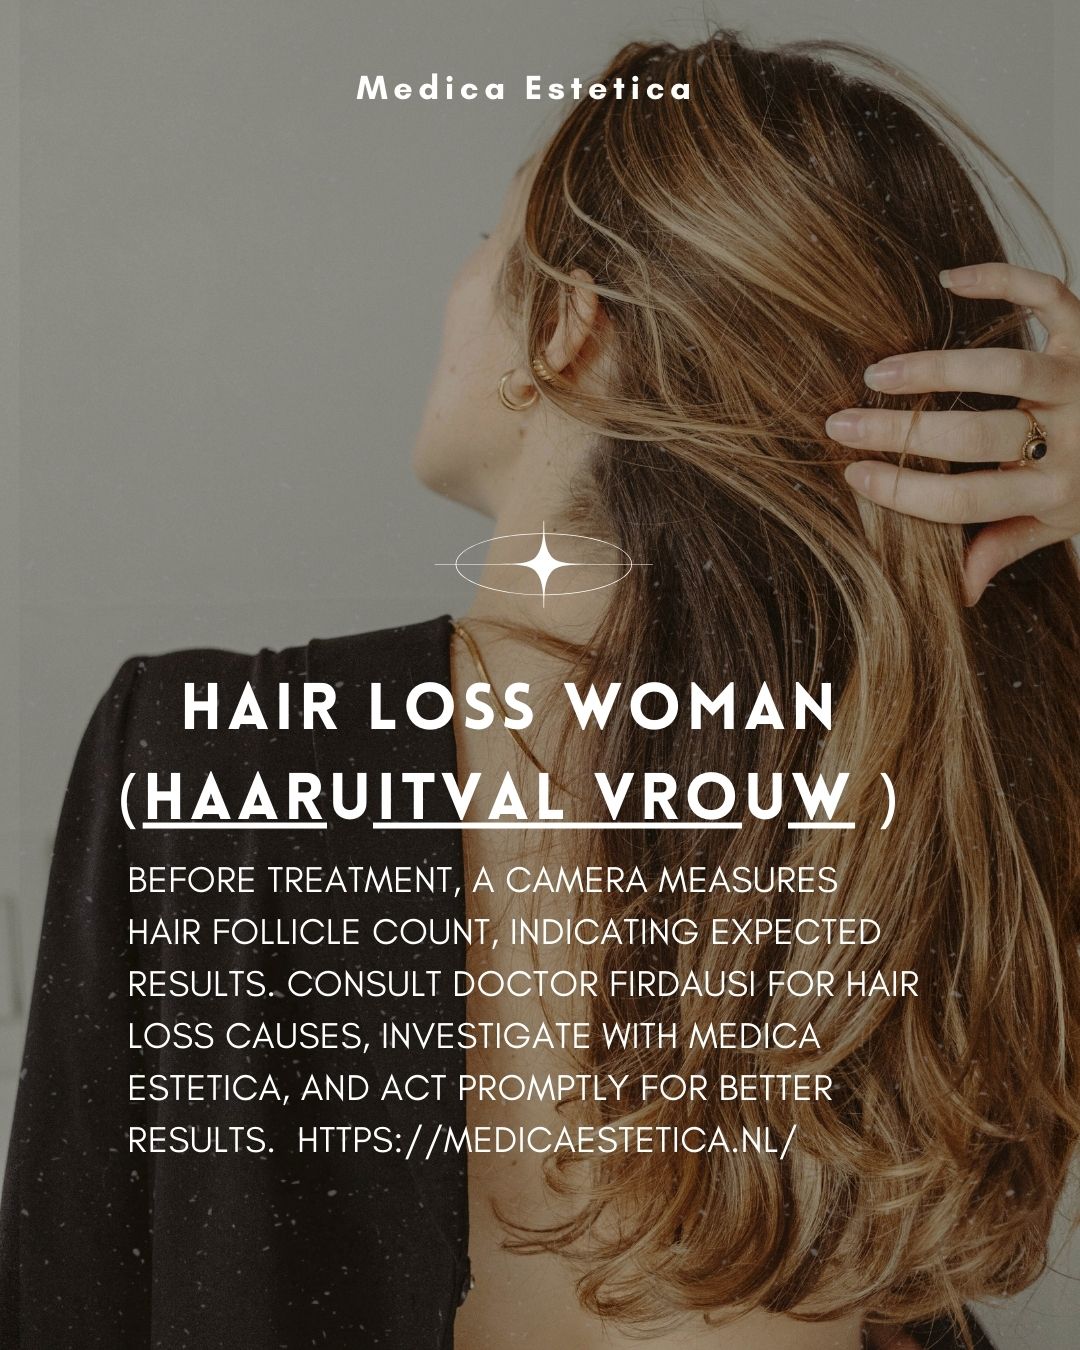 Most Common Causes of haaruitval vrouwen (hair loss in women)